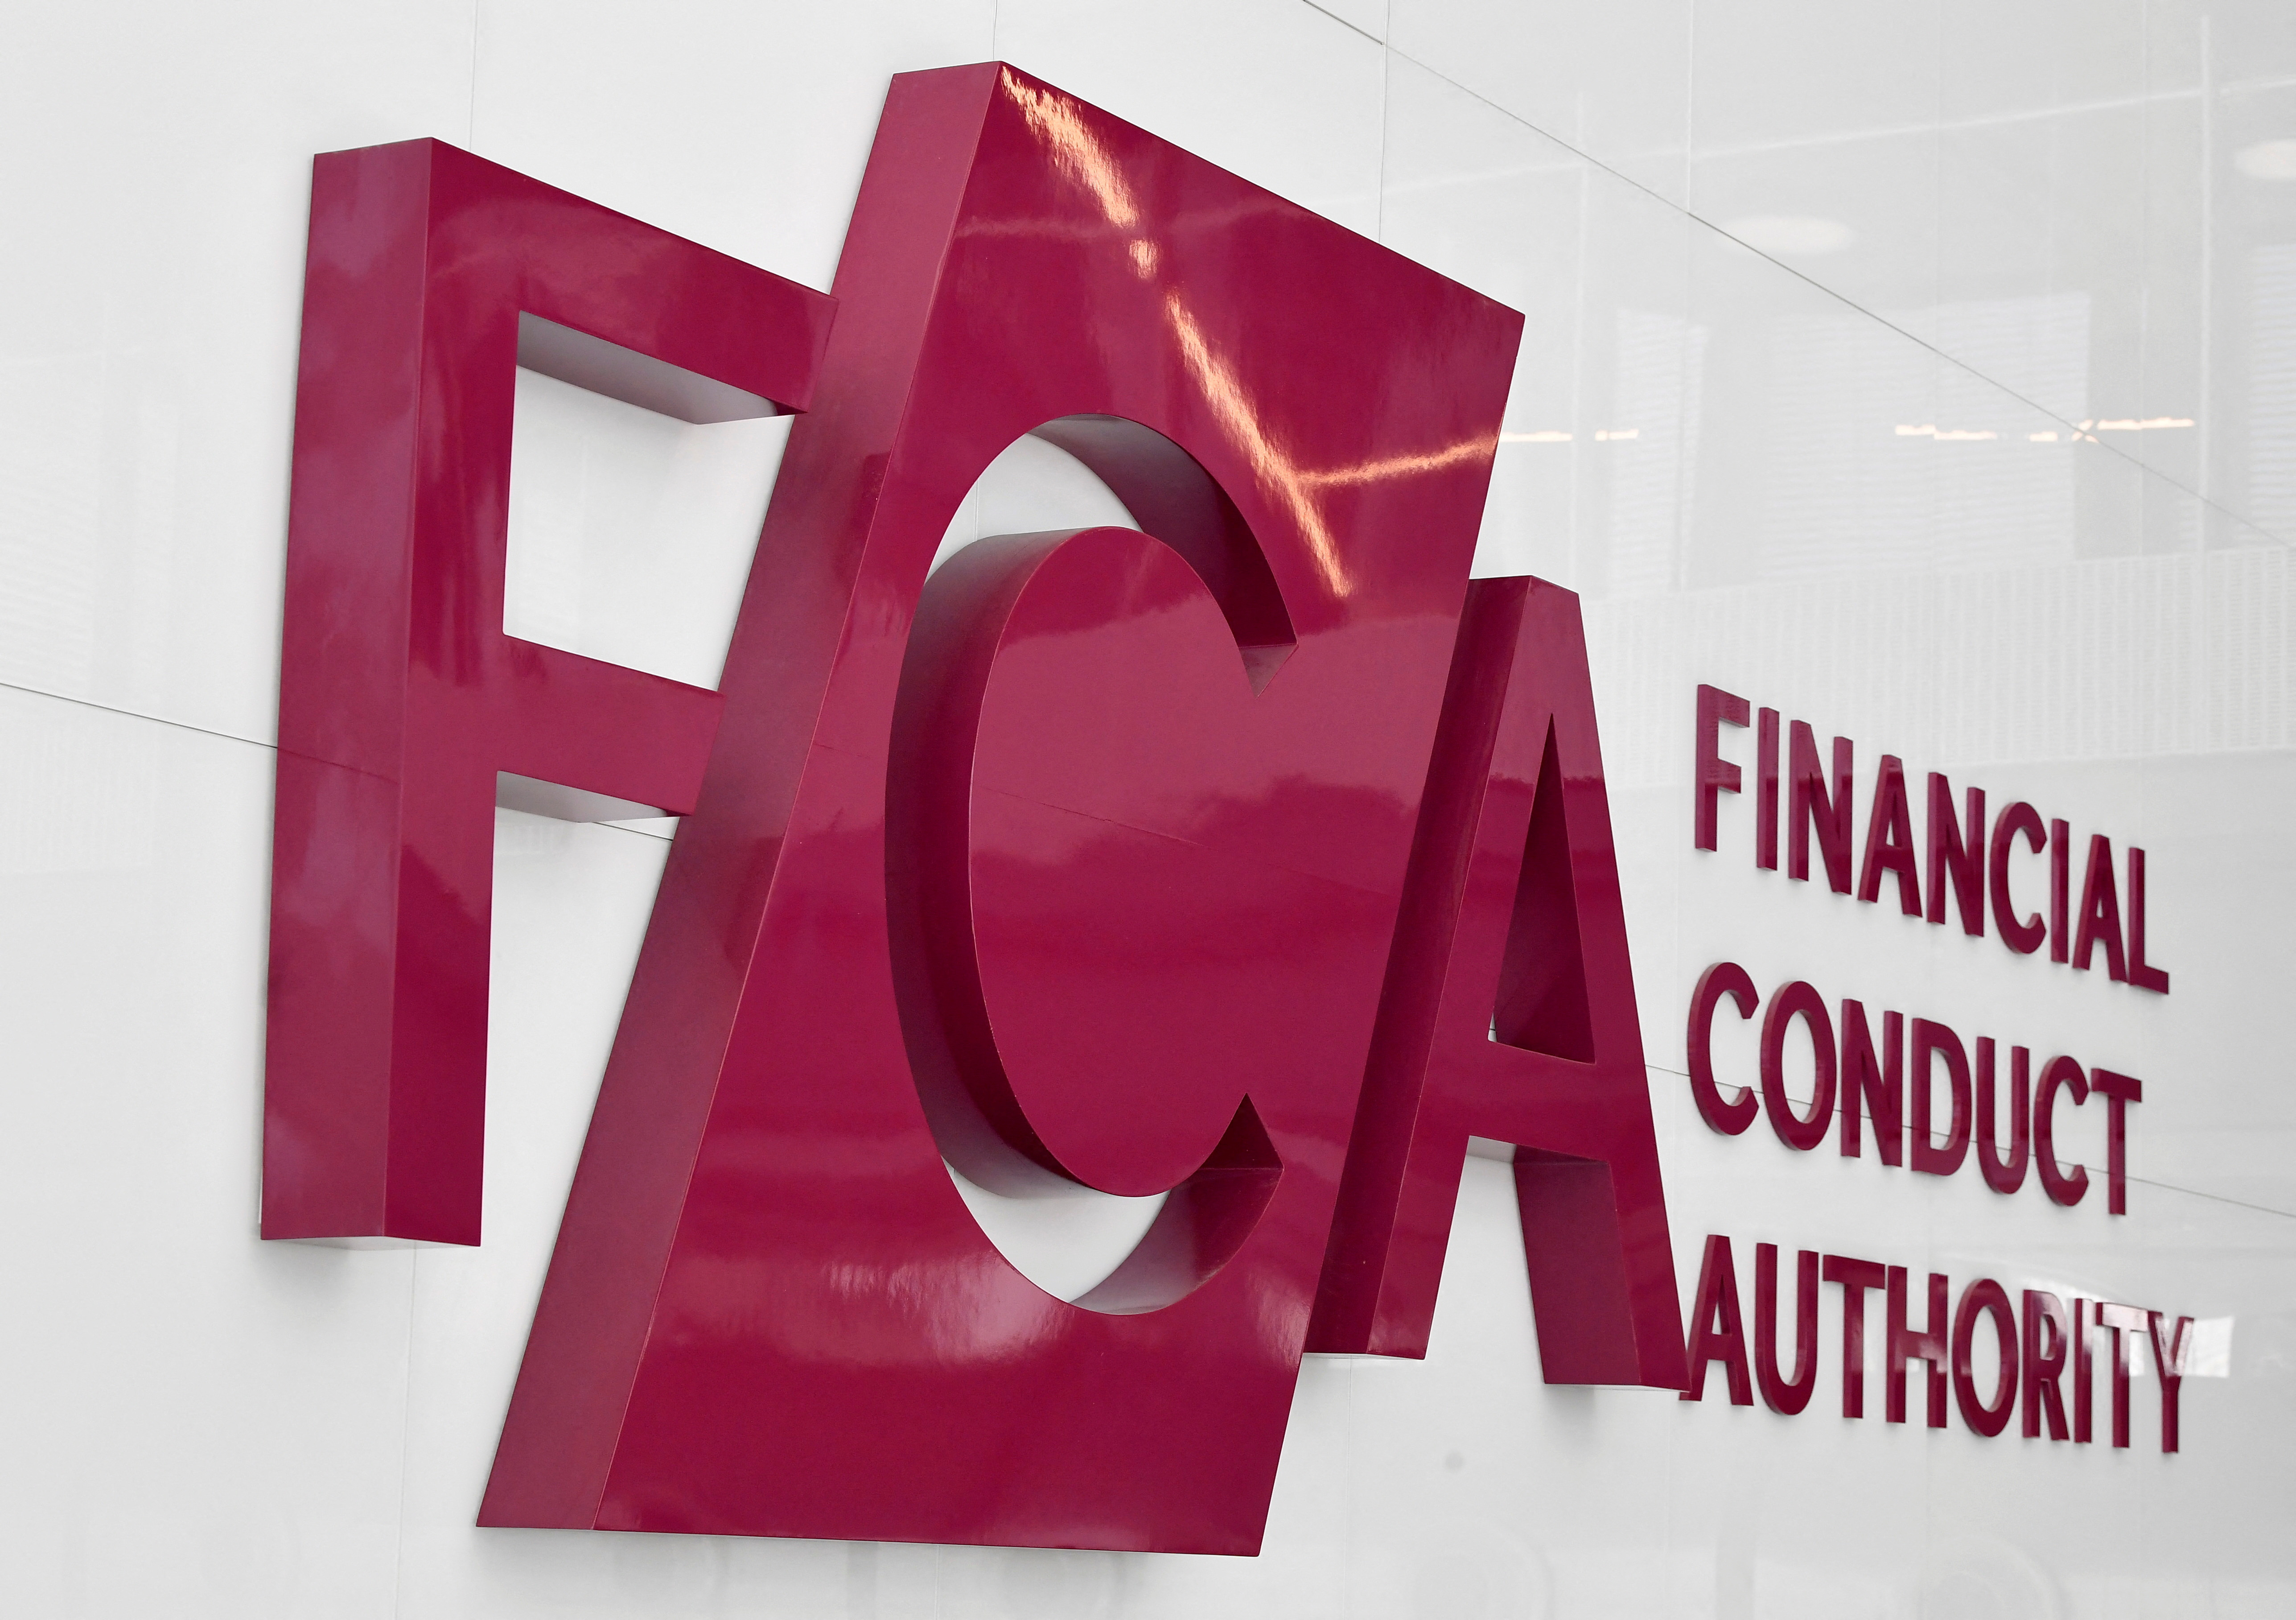 FCA signage is seen at the British financial regulator's head office in London